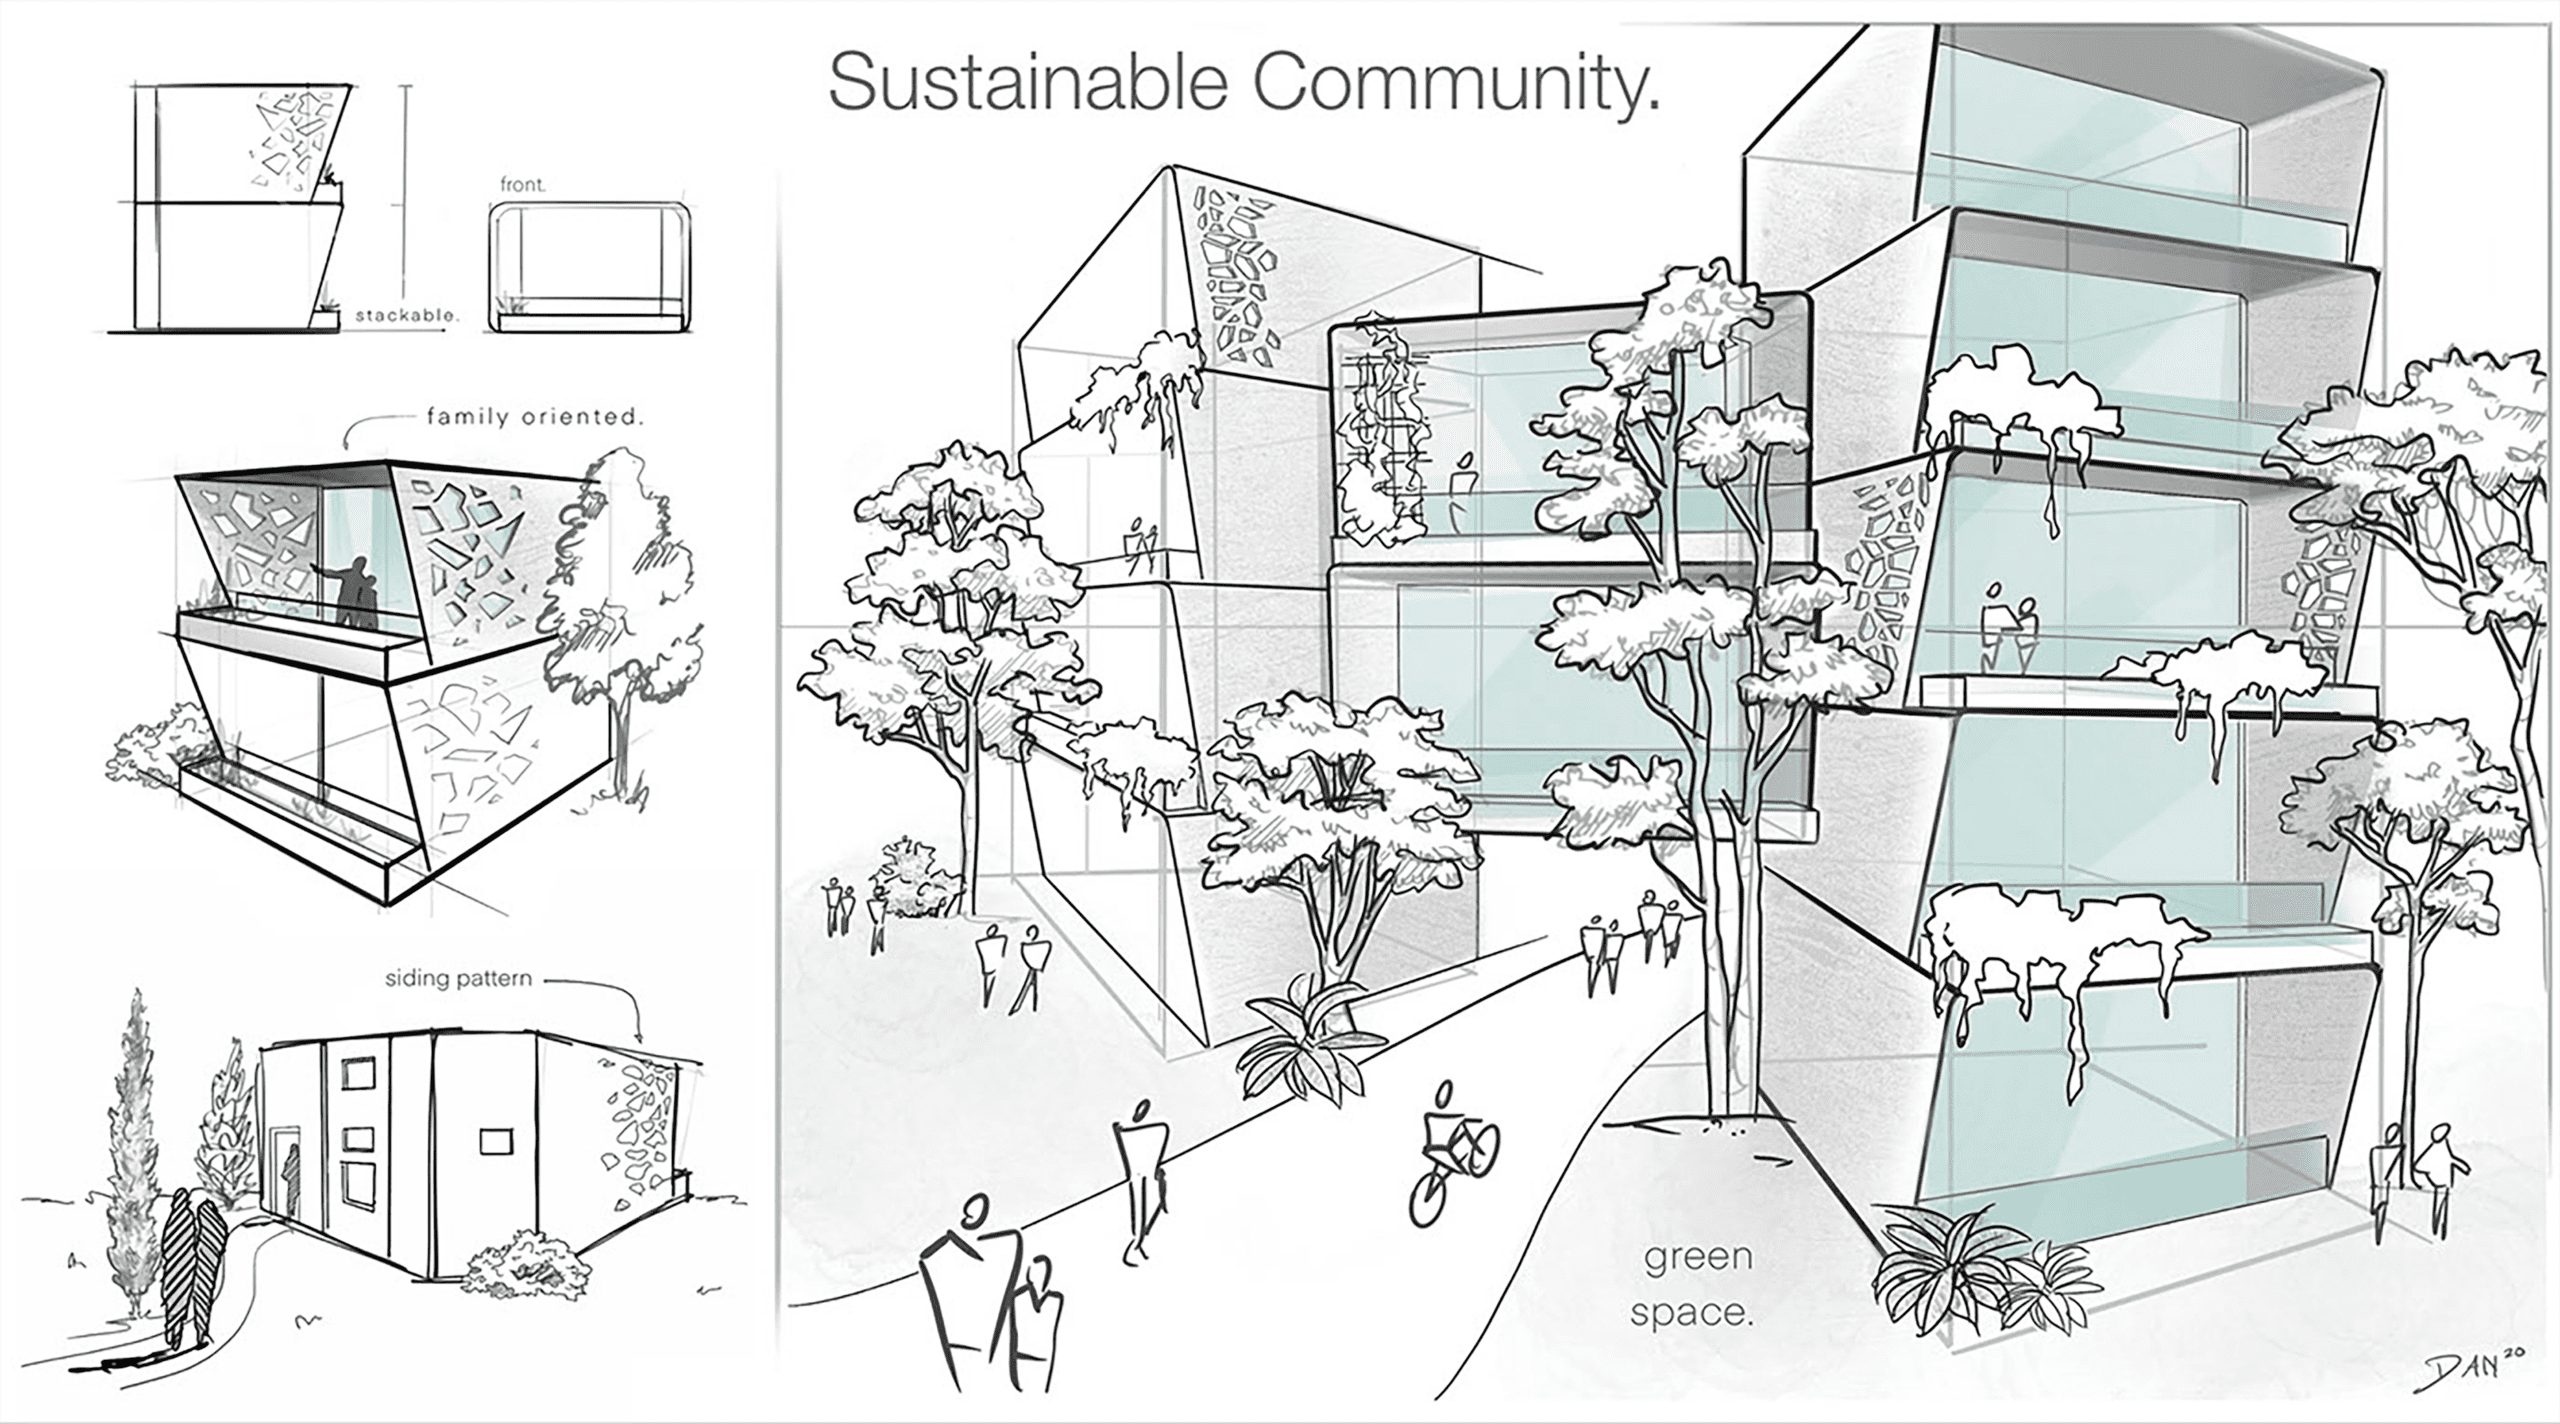 A semi transparent sketch of sustainable housing surrounded by trees and shrubs. The housing is made up of stacked rectangular units with giant windows facing the outside. Two sides of the housing are connected by a two story glass bridge.